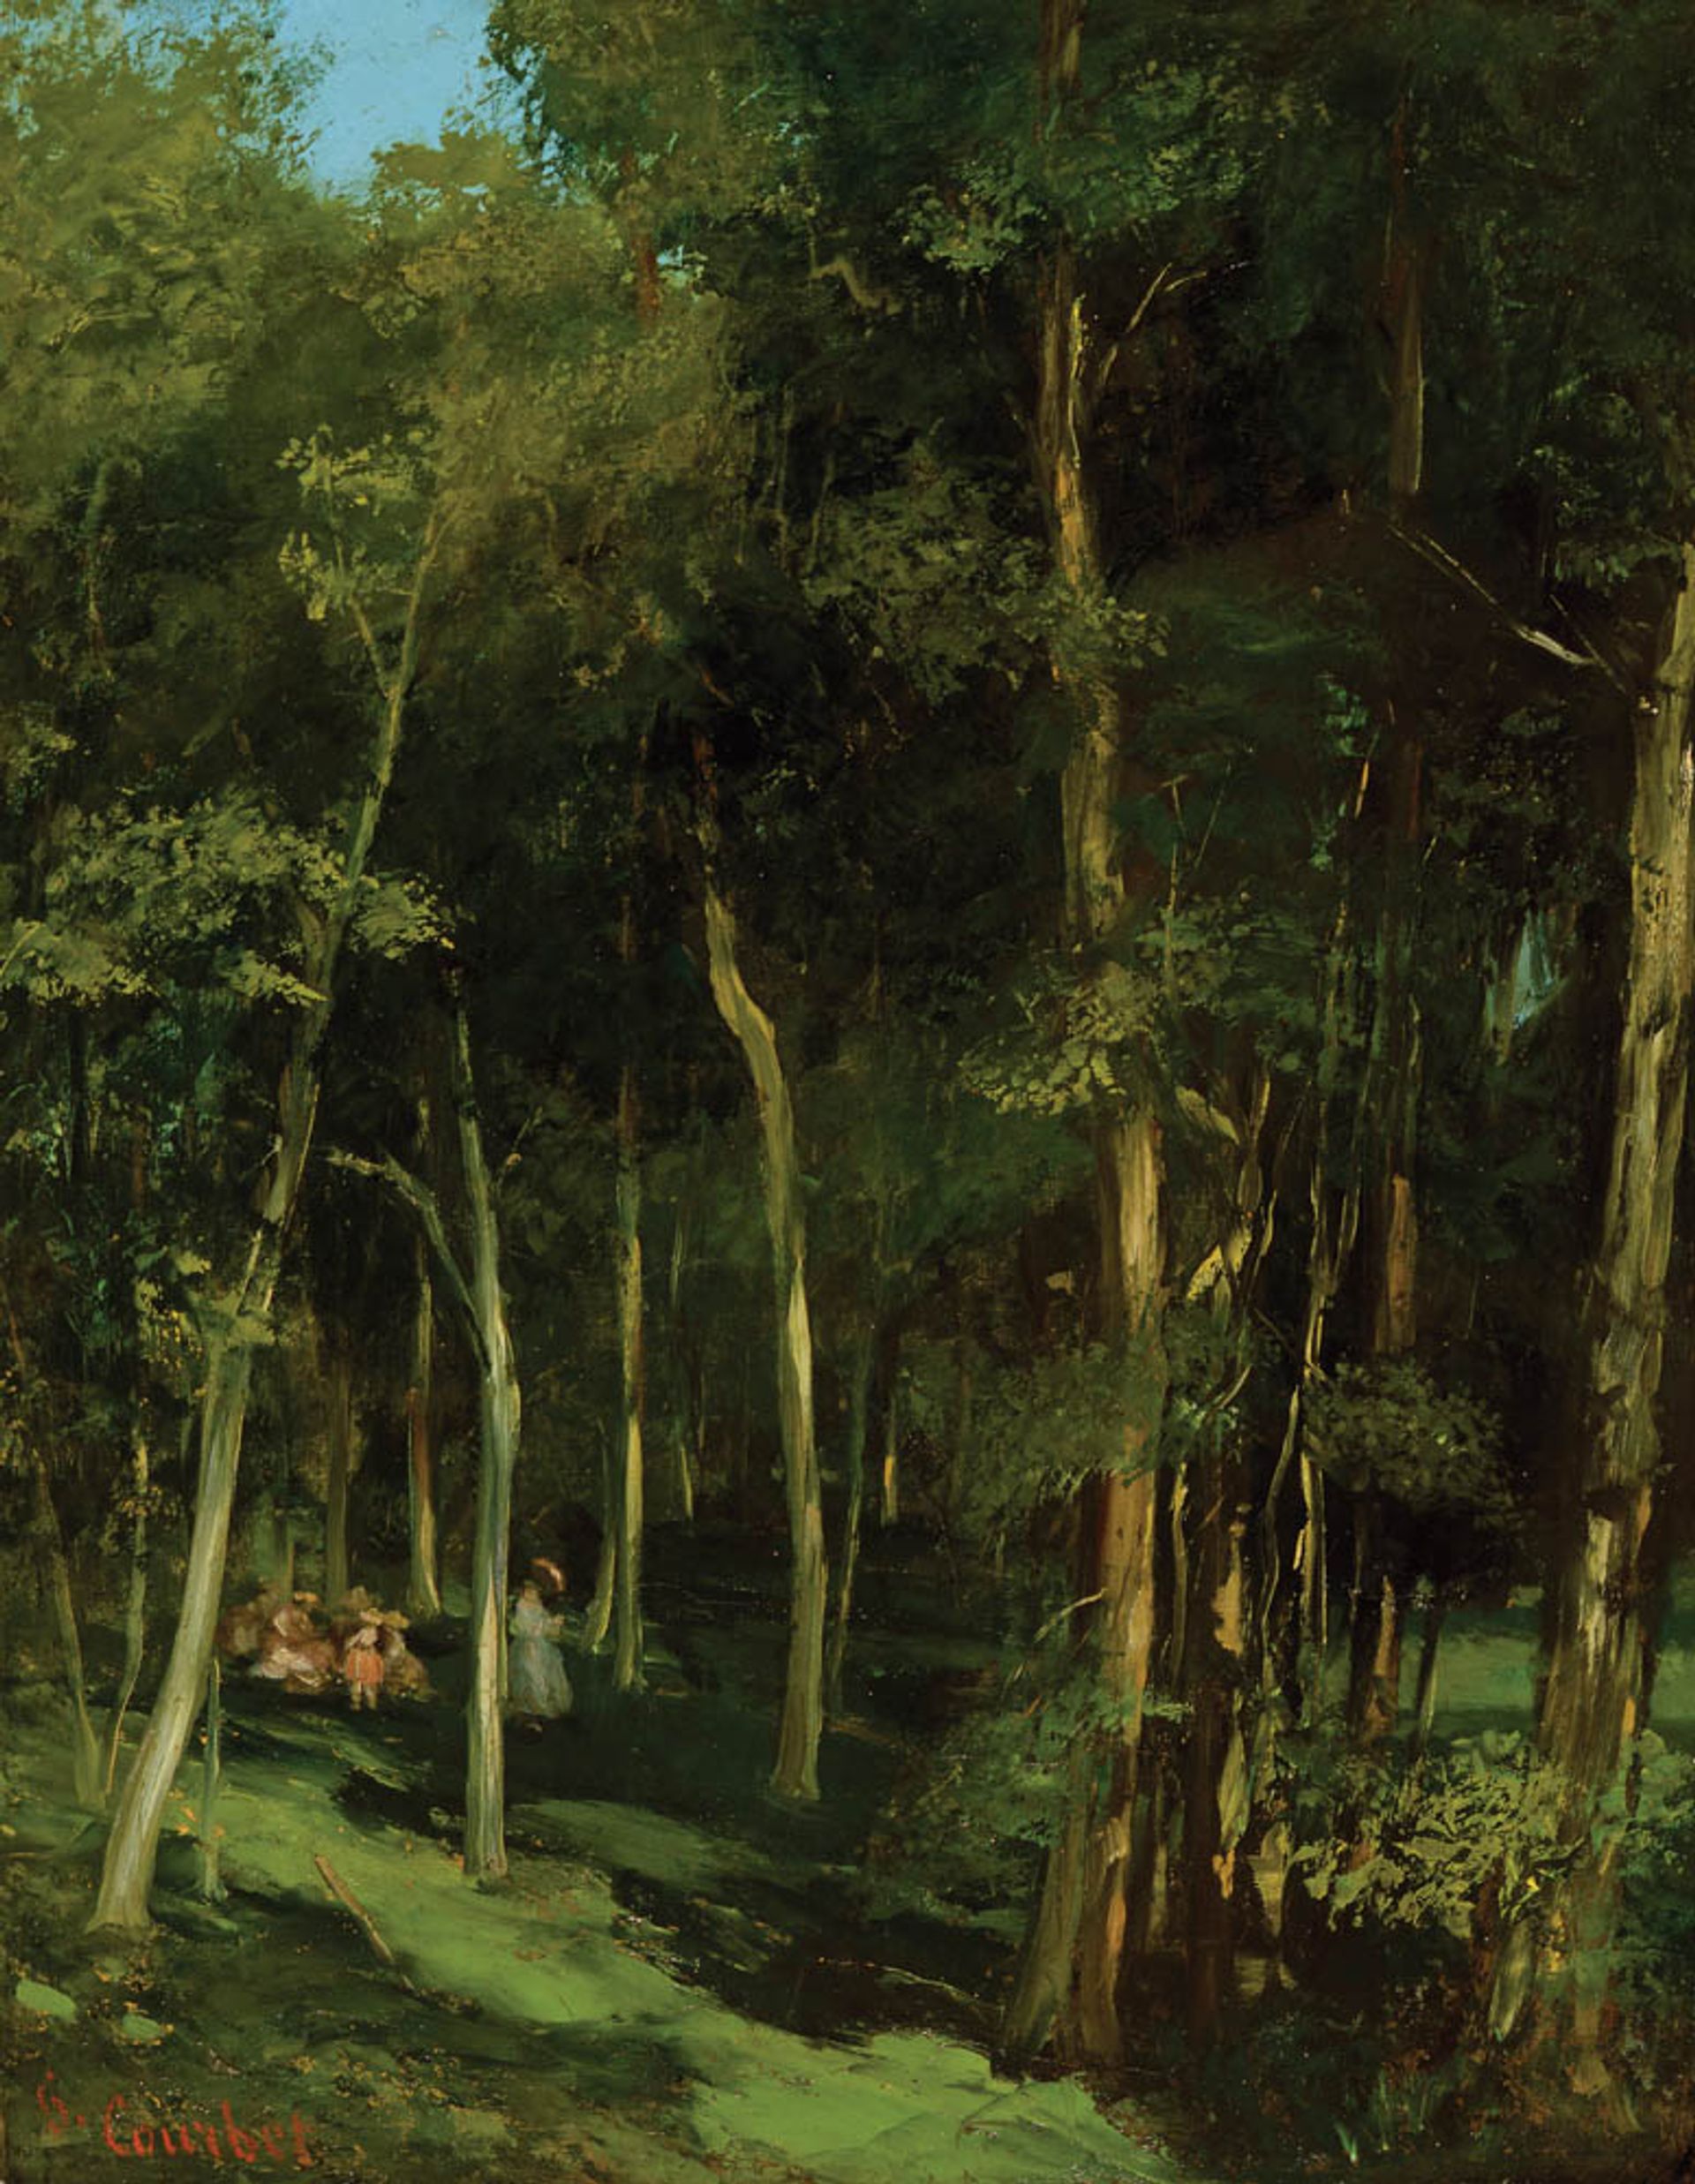 The sylvan La Ronde Enfantine, painted around 1863, may well have been known as Forest Scene © The Fitzwilliam Museum, Cambridge